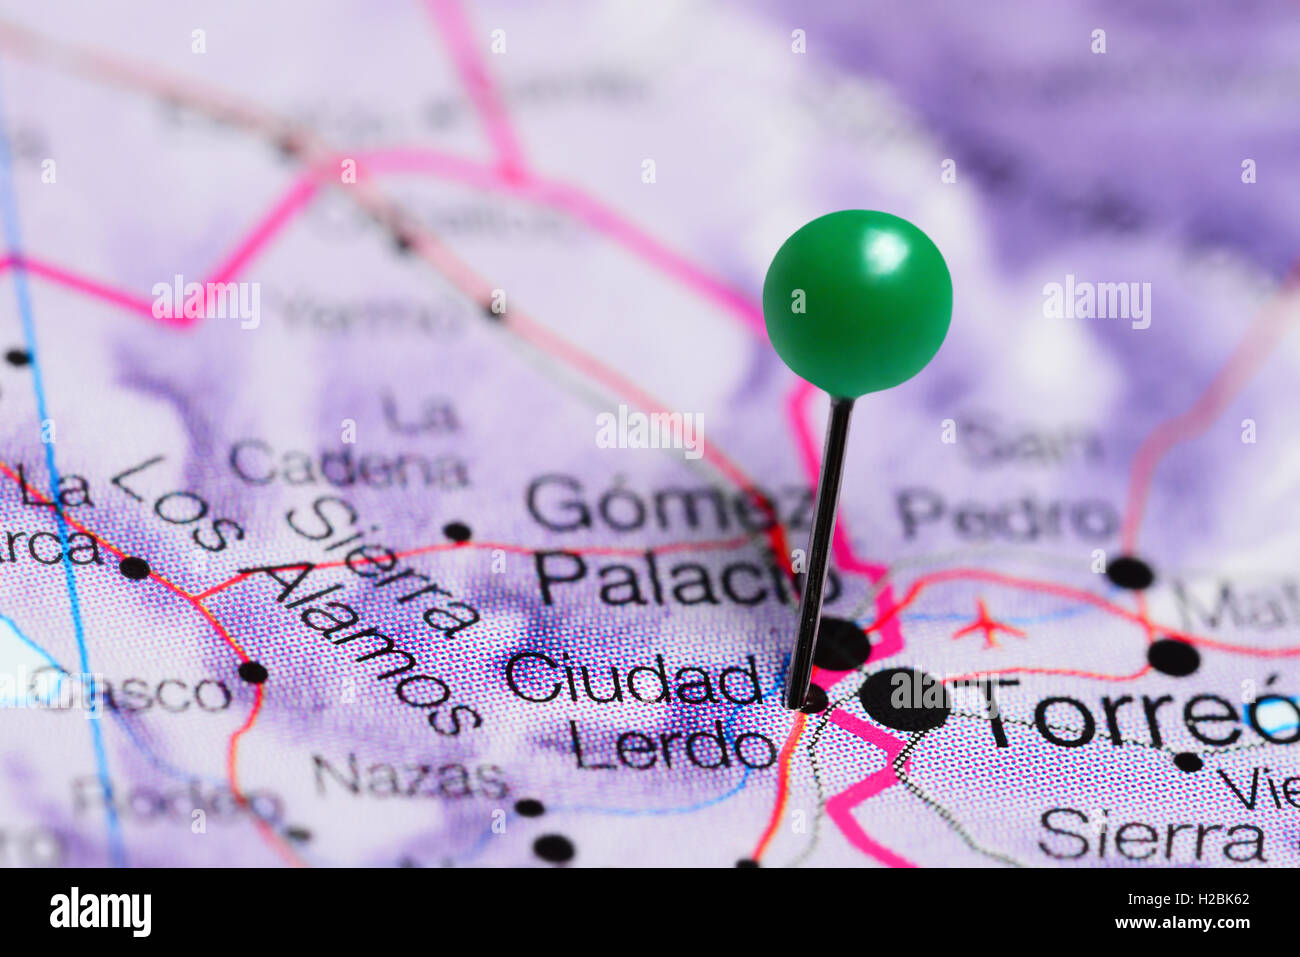 Ciudad Lerdo pinned on a map of Mexico Stock Photo